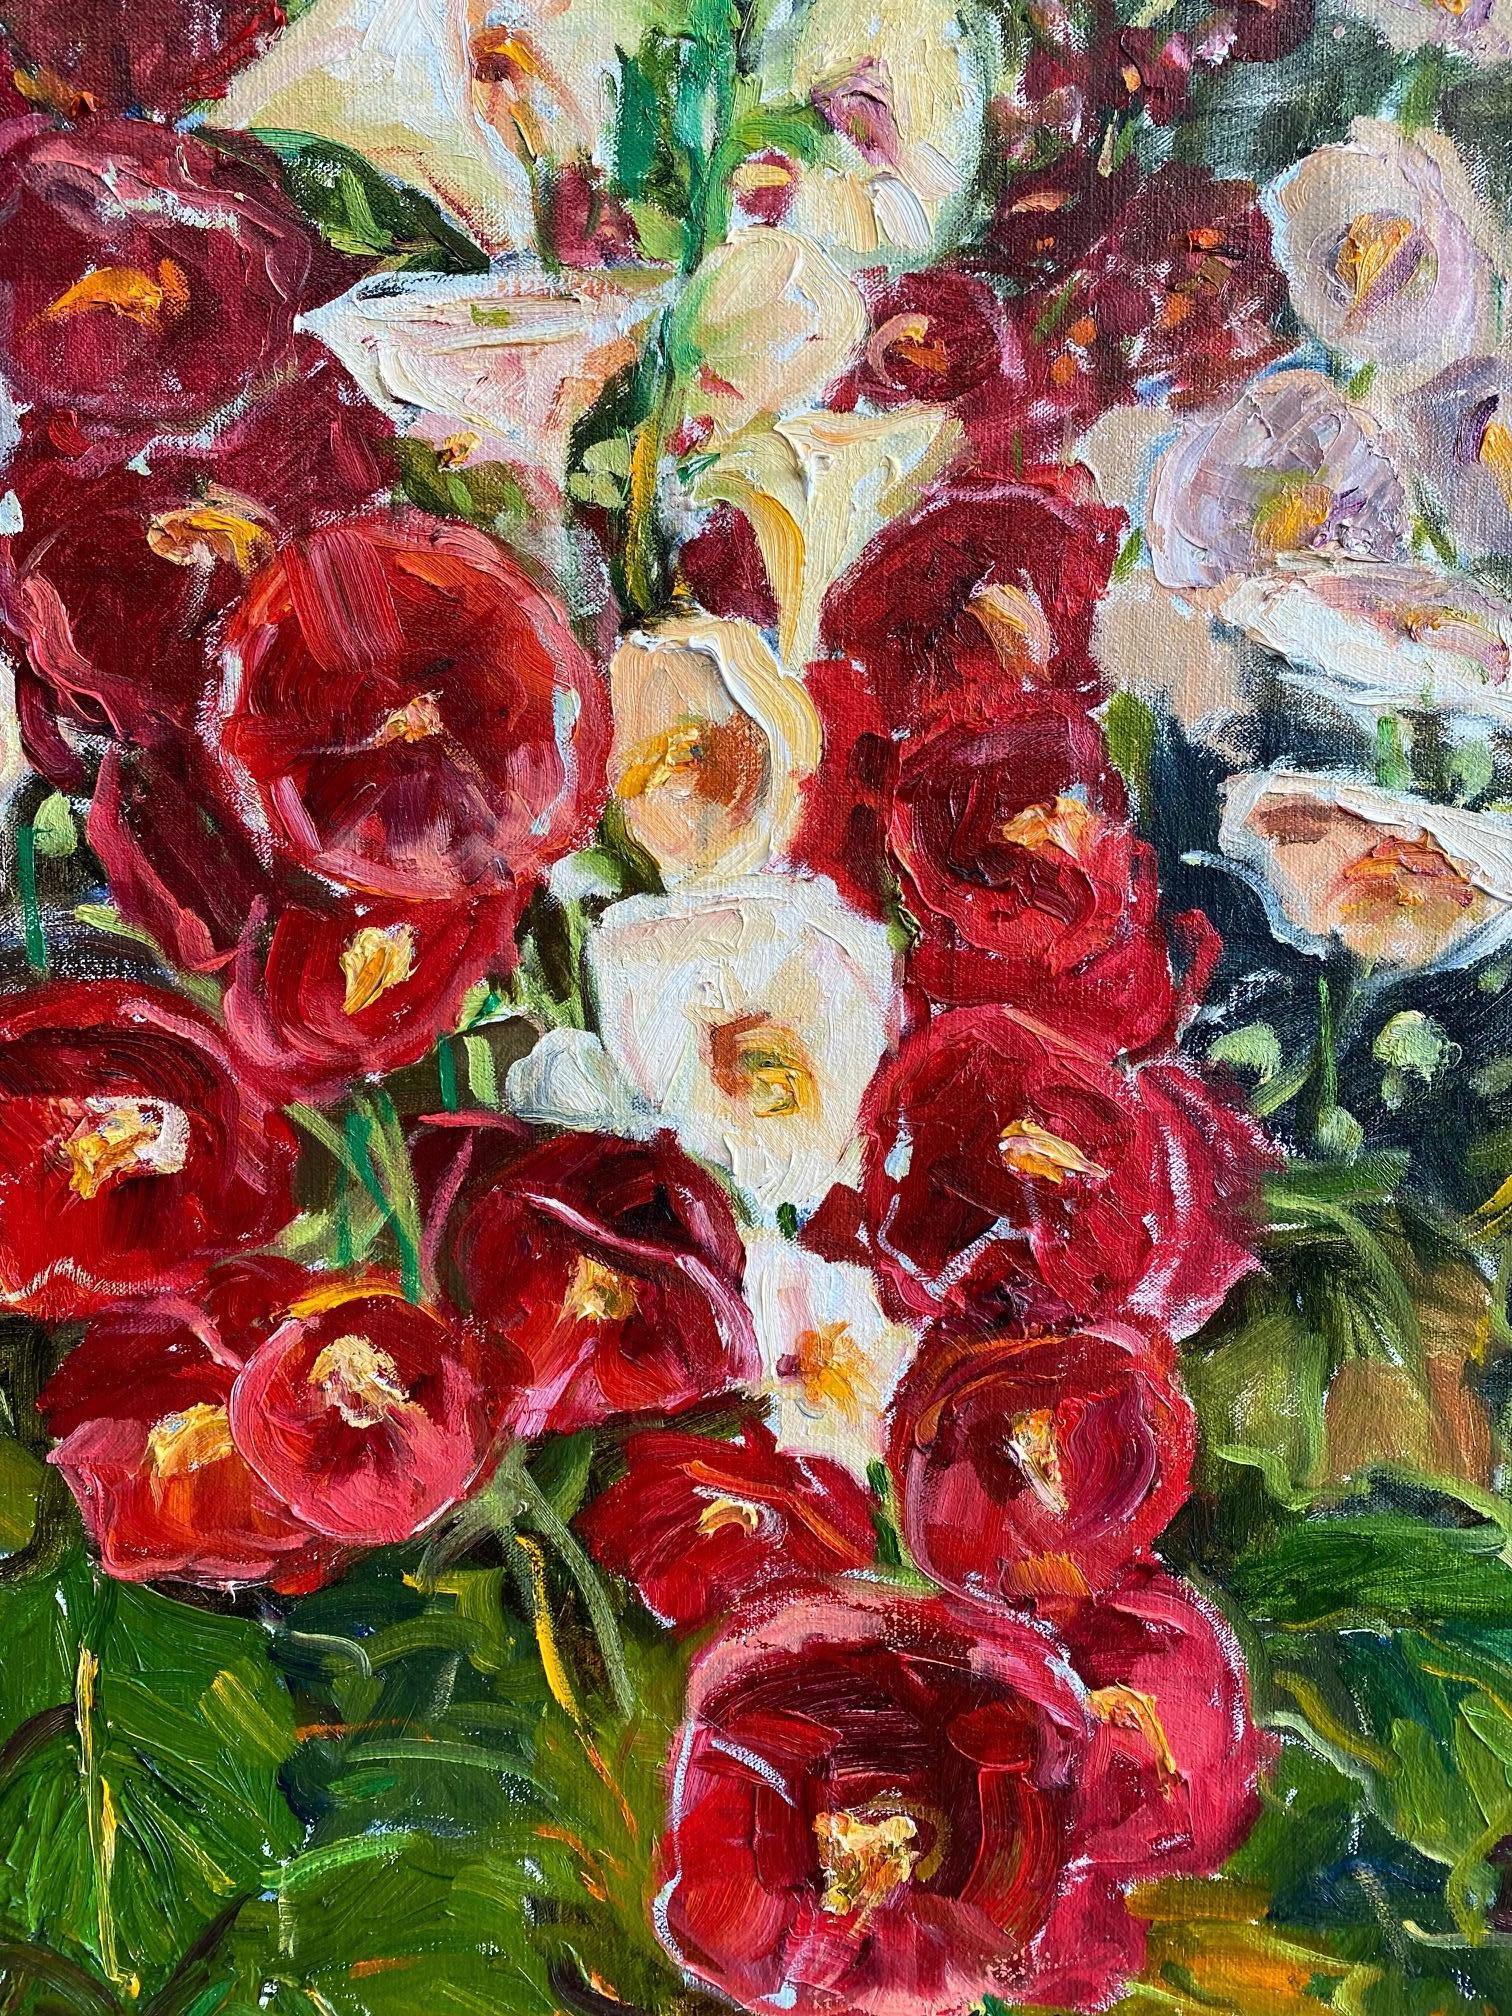 Hollyhocks in Full Bloom, original 30x24 expressionist floral landscape - Painting by Doreen Tighe